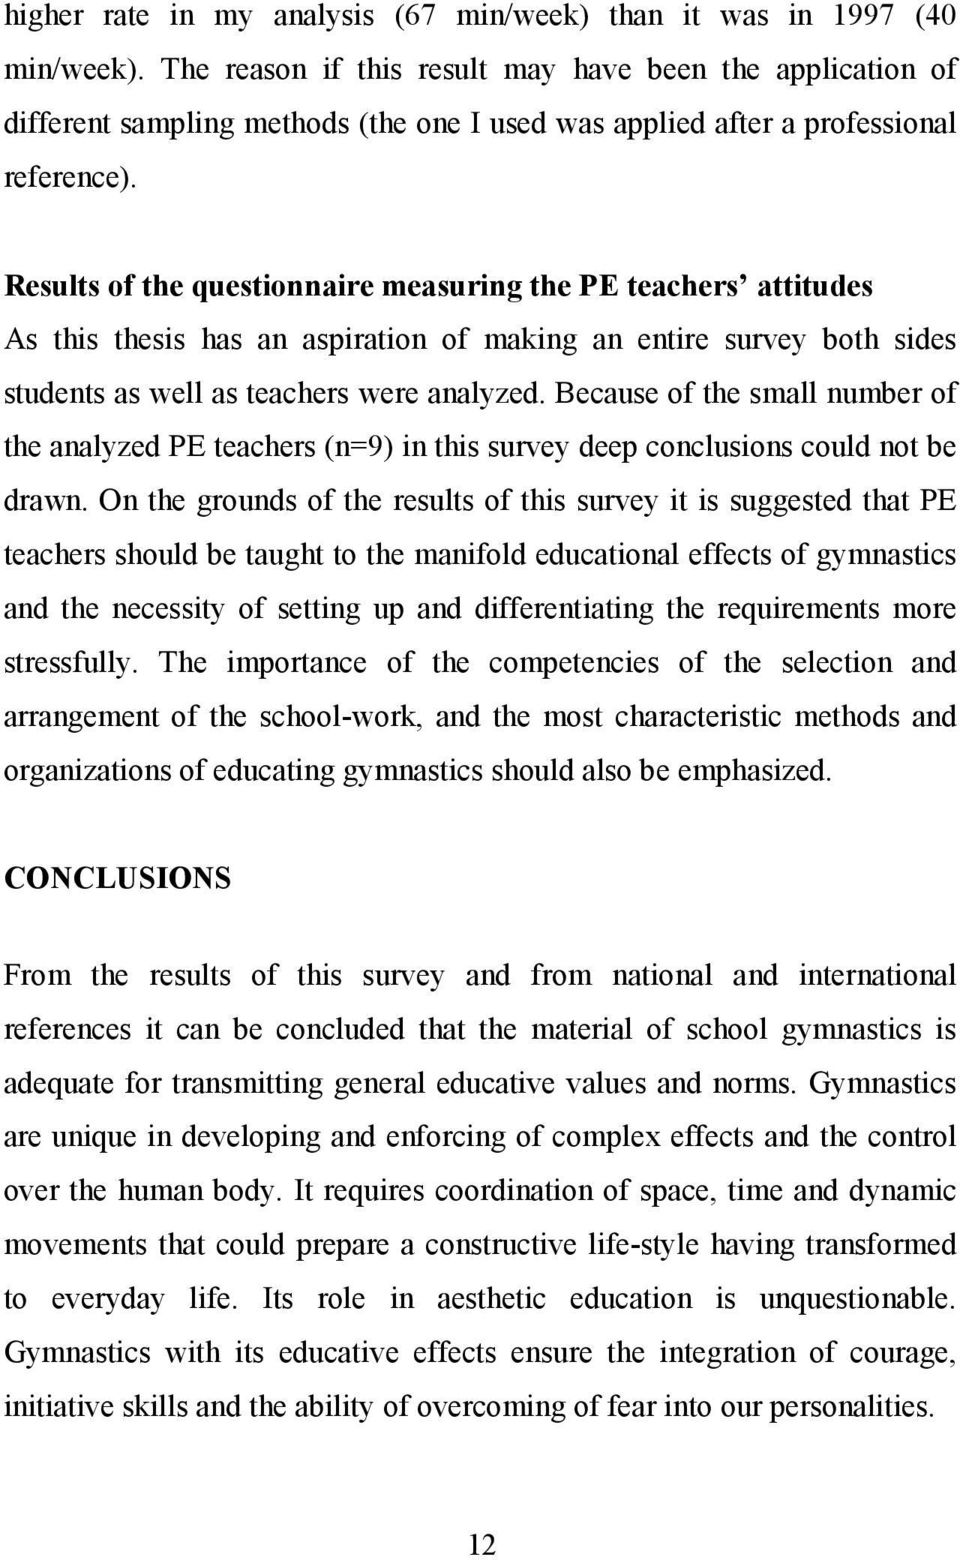 Results of the questionnaire measuring the PE teachers attitudes As this thesis has an aspiration of making an entire survey both sides students as well as teachers were analyzed.